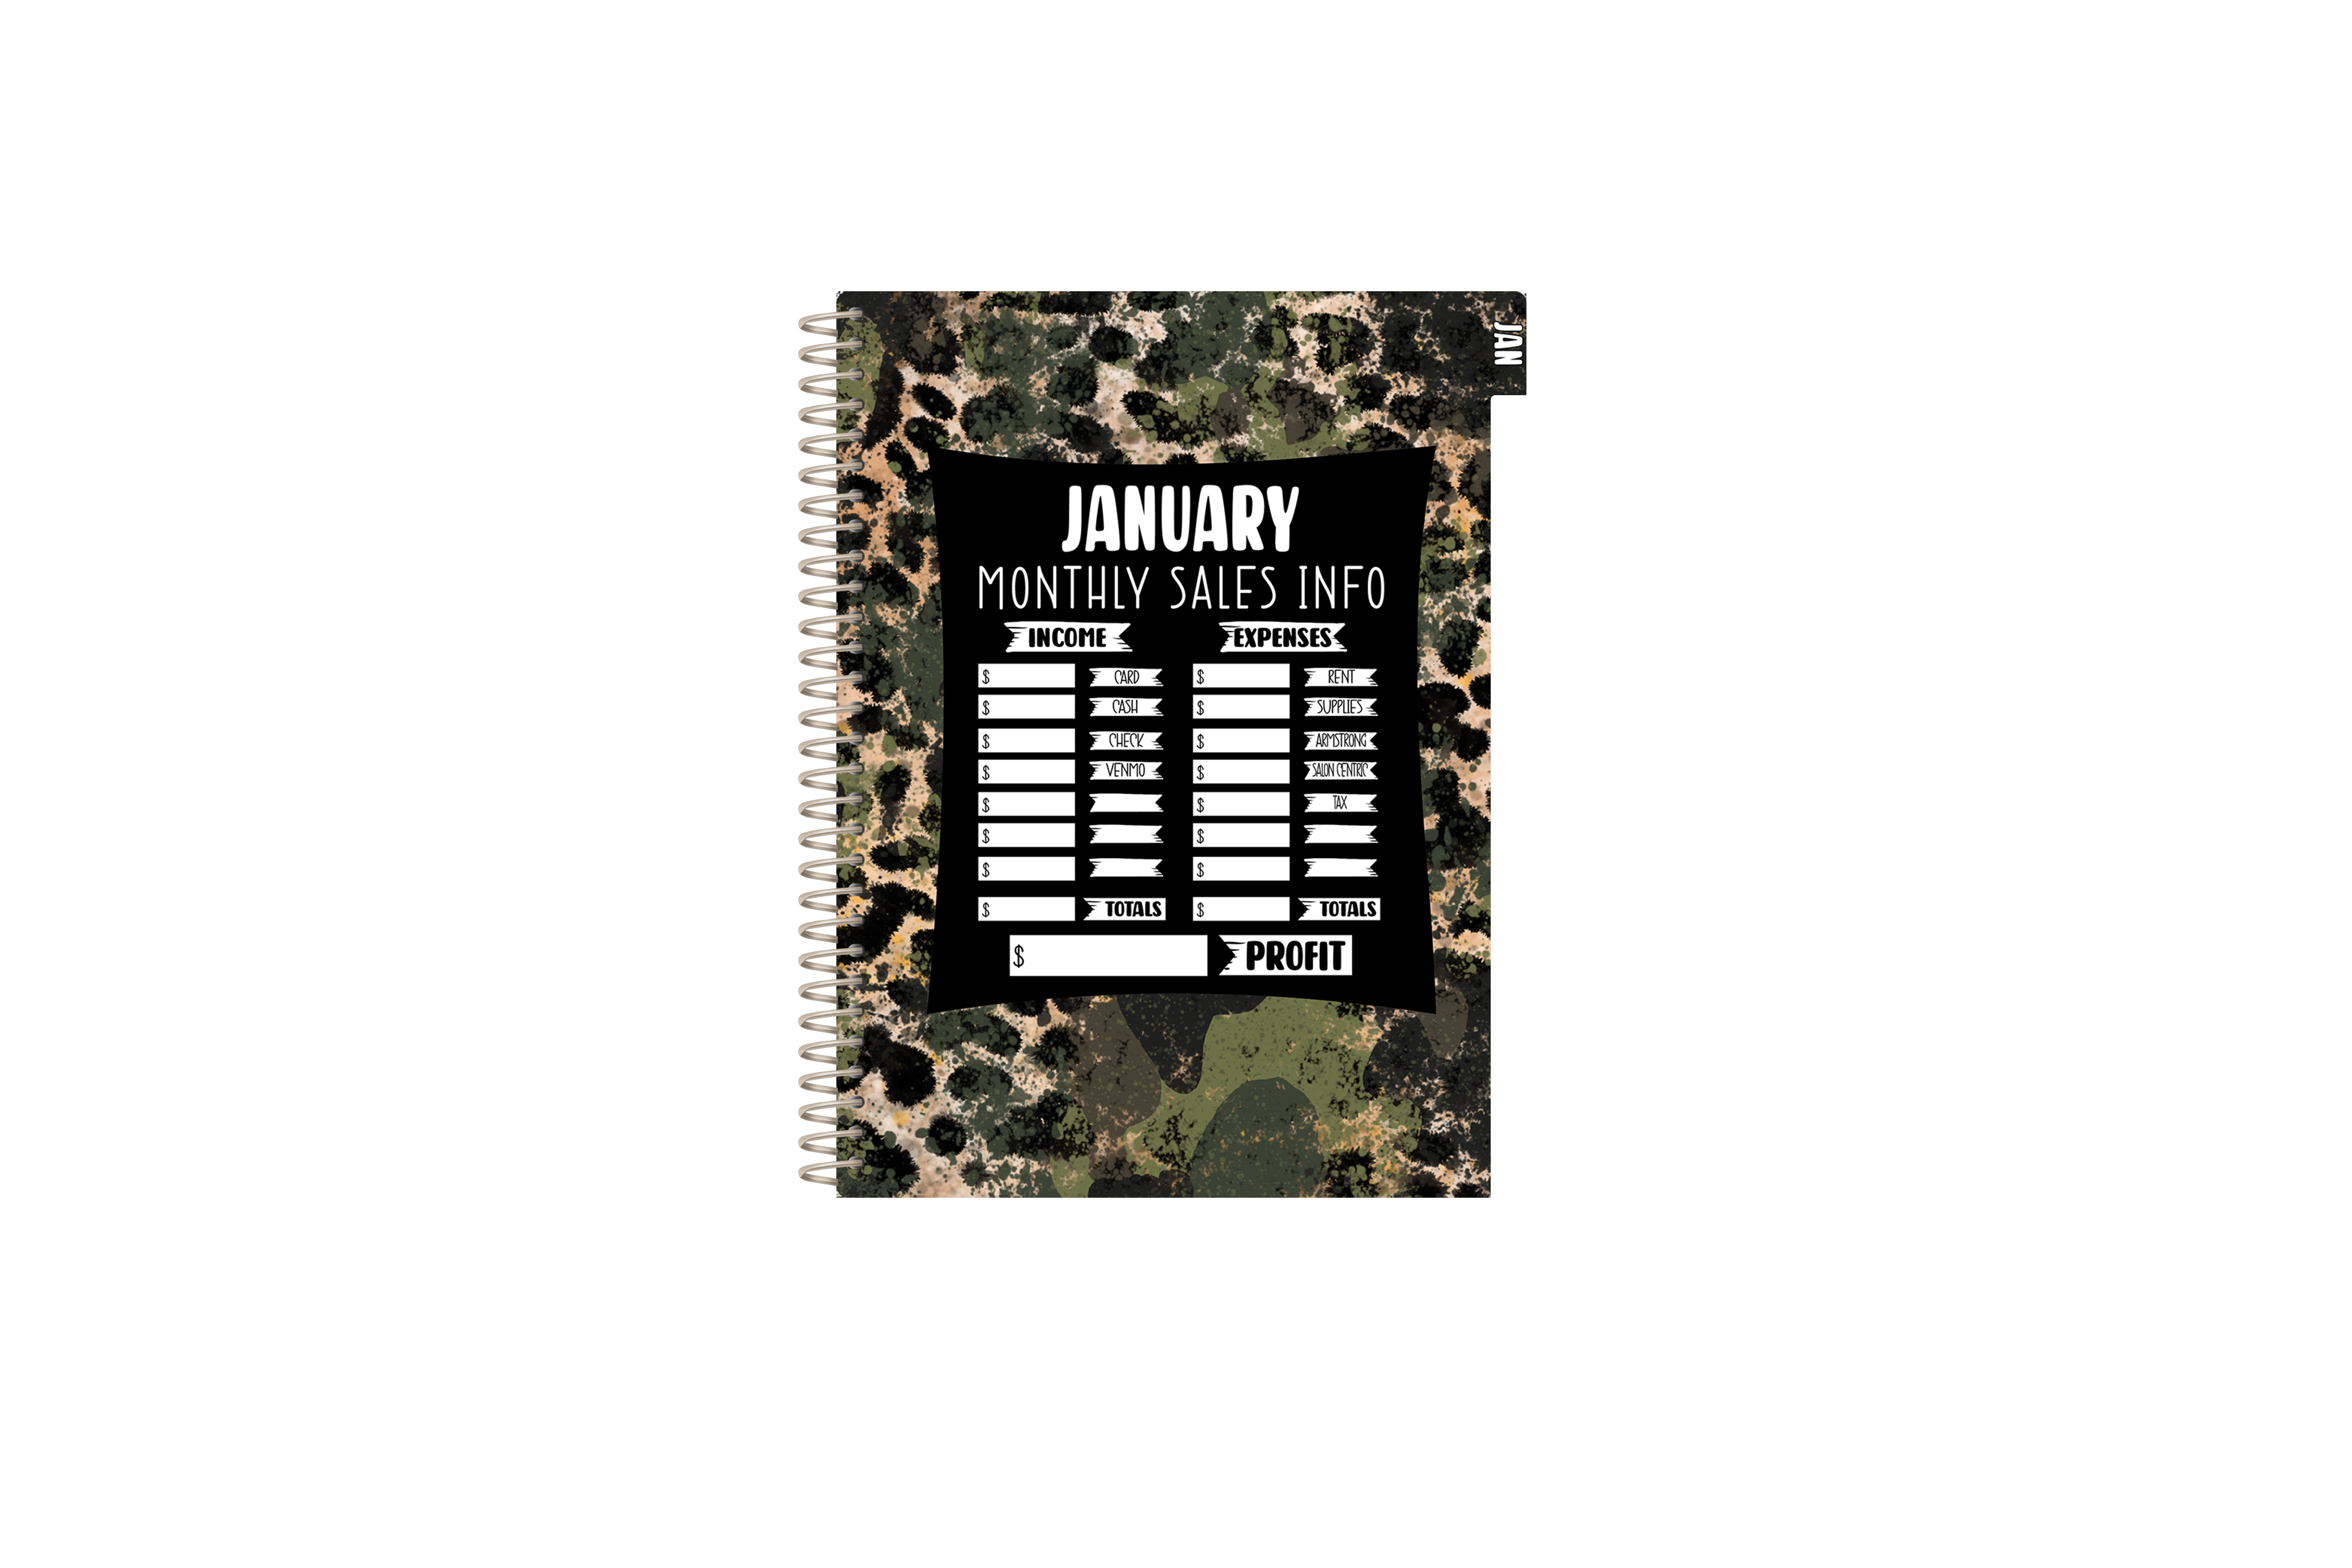 The Chelsea Appointment Book - CAMO LEOPARD